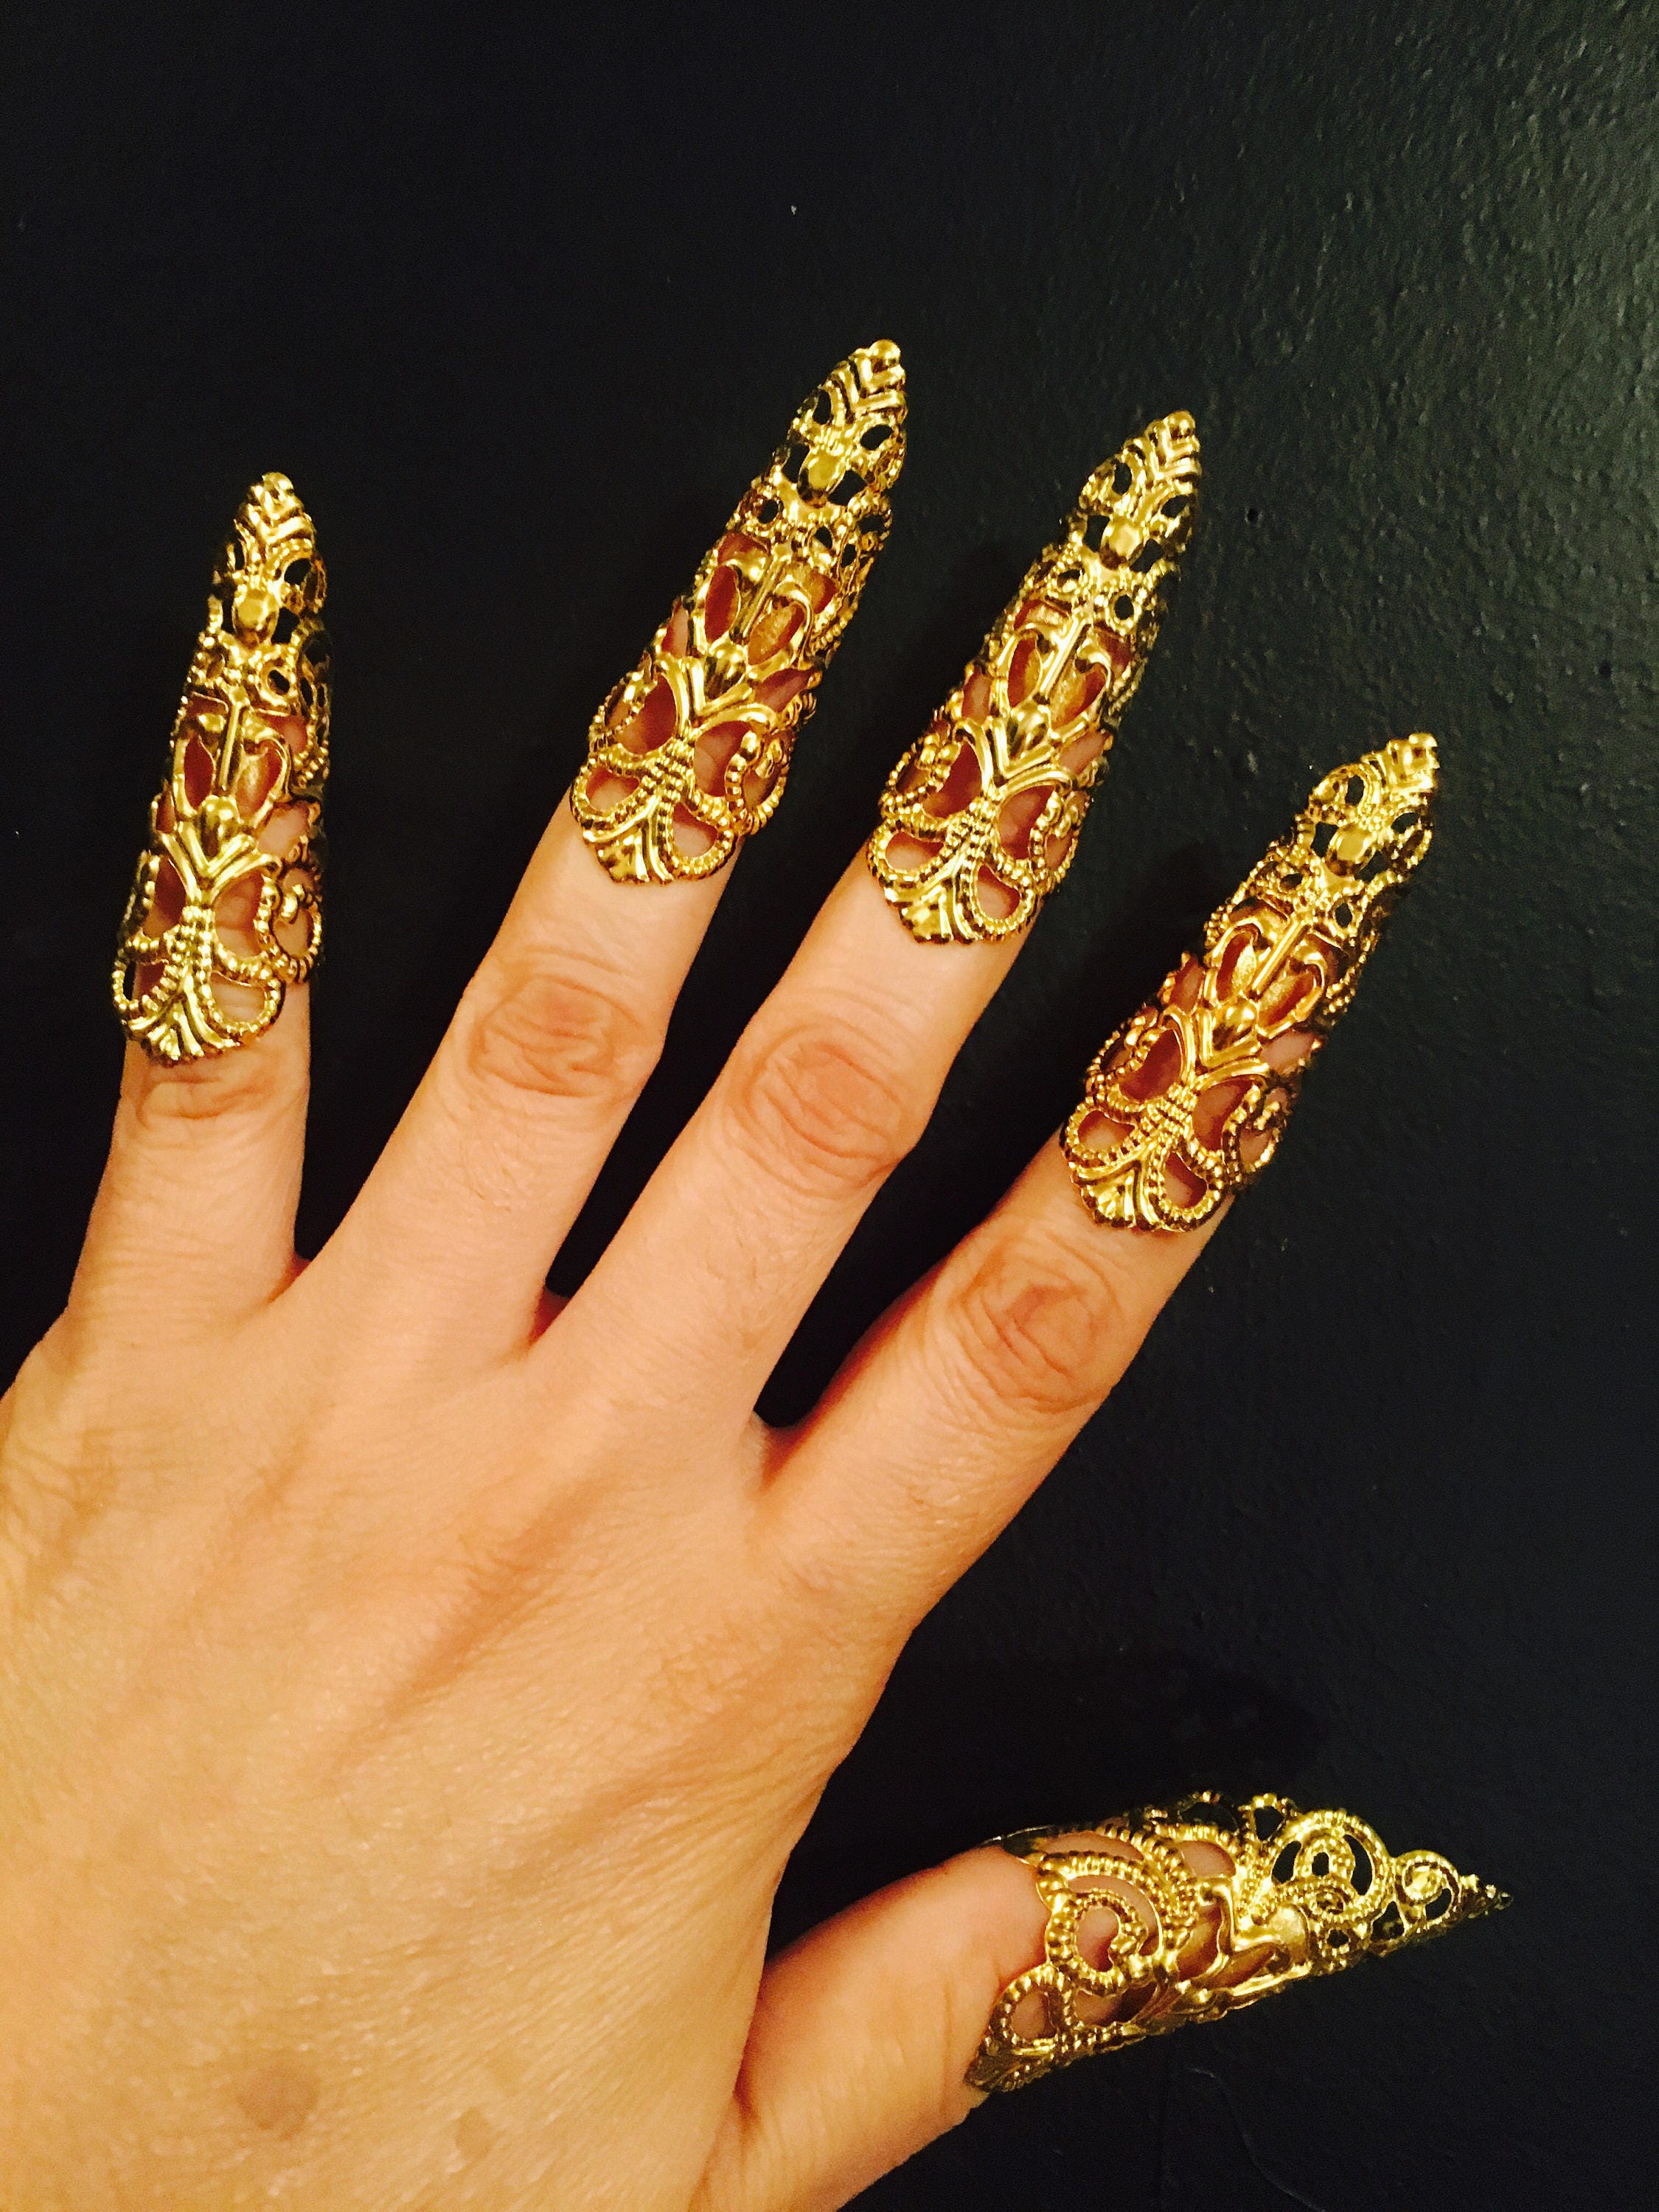 Finger Nail Tip Claw Rings Set 5pcs Thicken Retro Gold Claws Decoration  Accessory for Women Dance Party